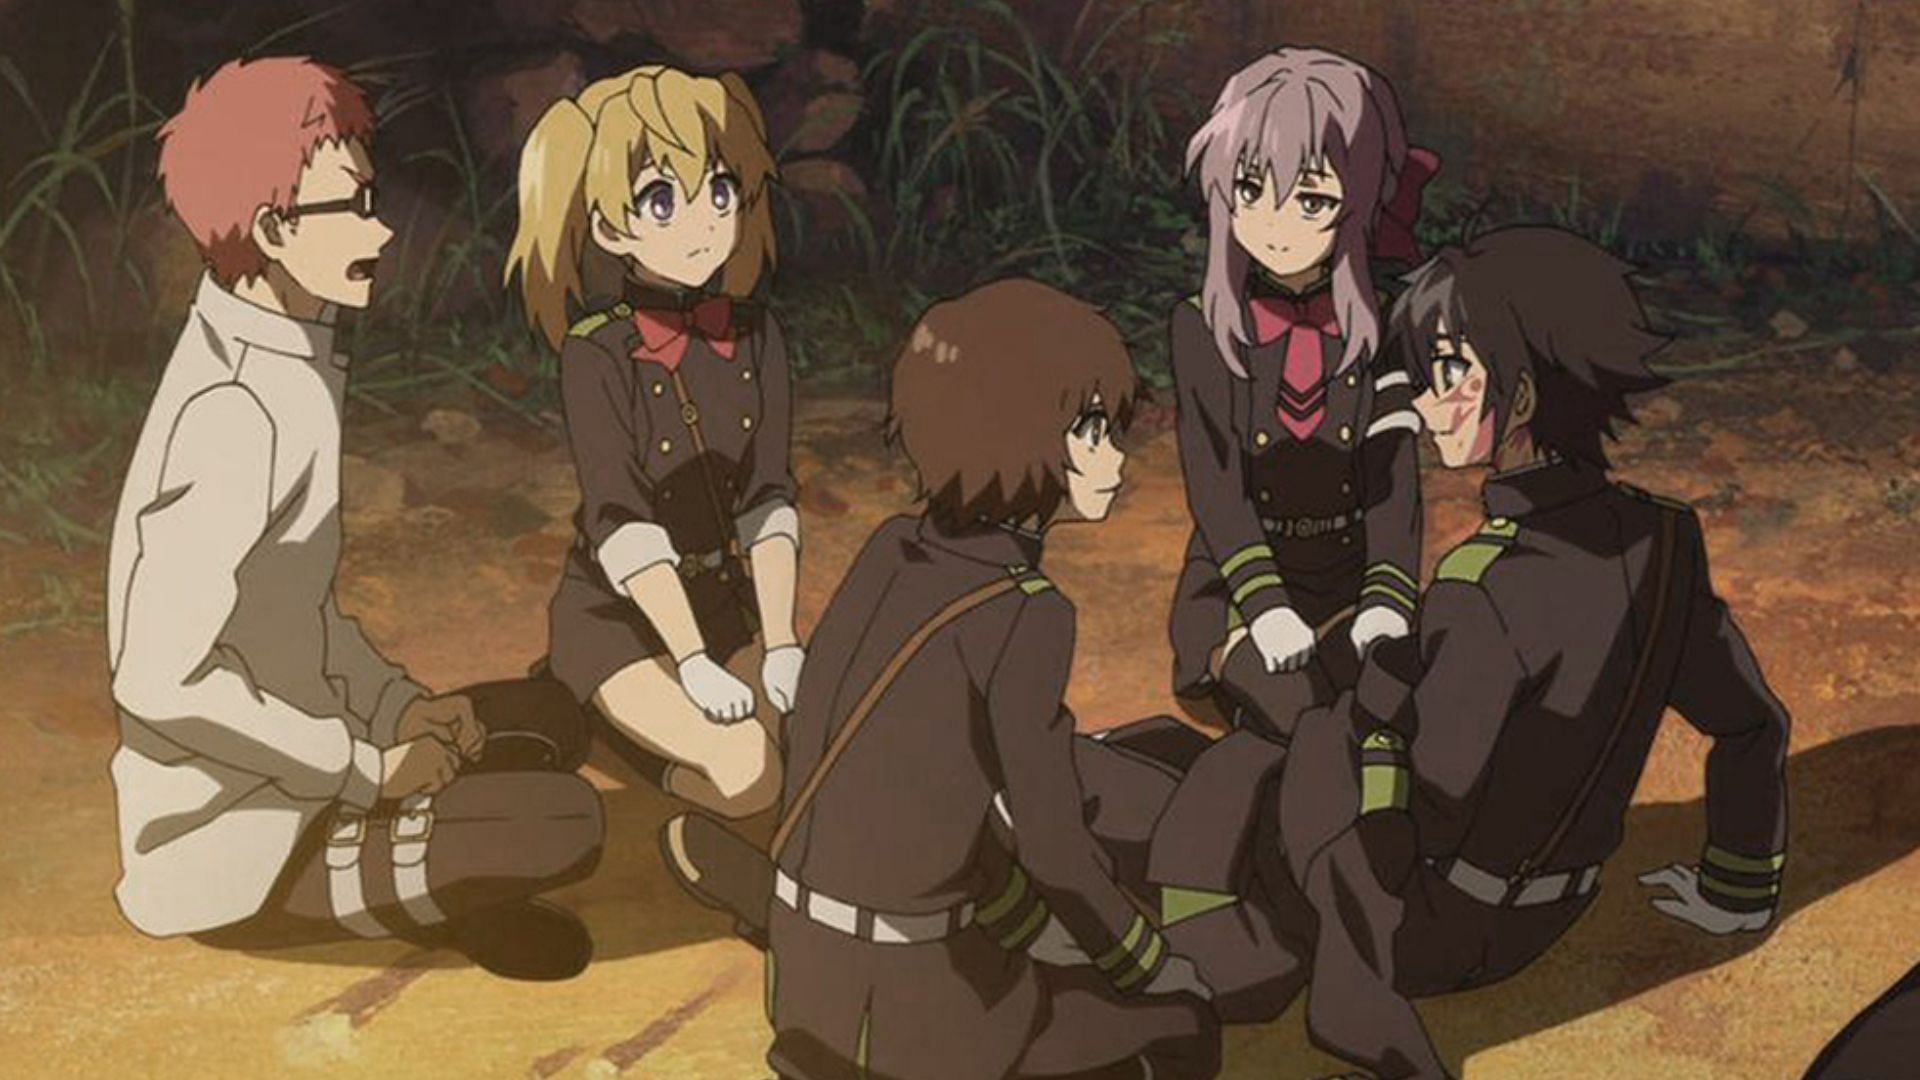 Cast of Seraph of the End (Image via Wit Studio)